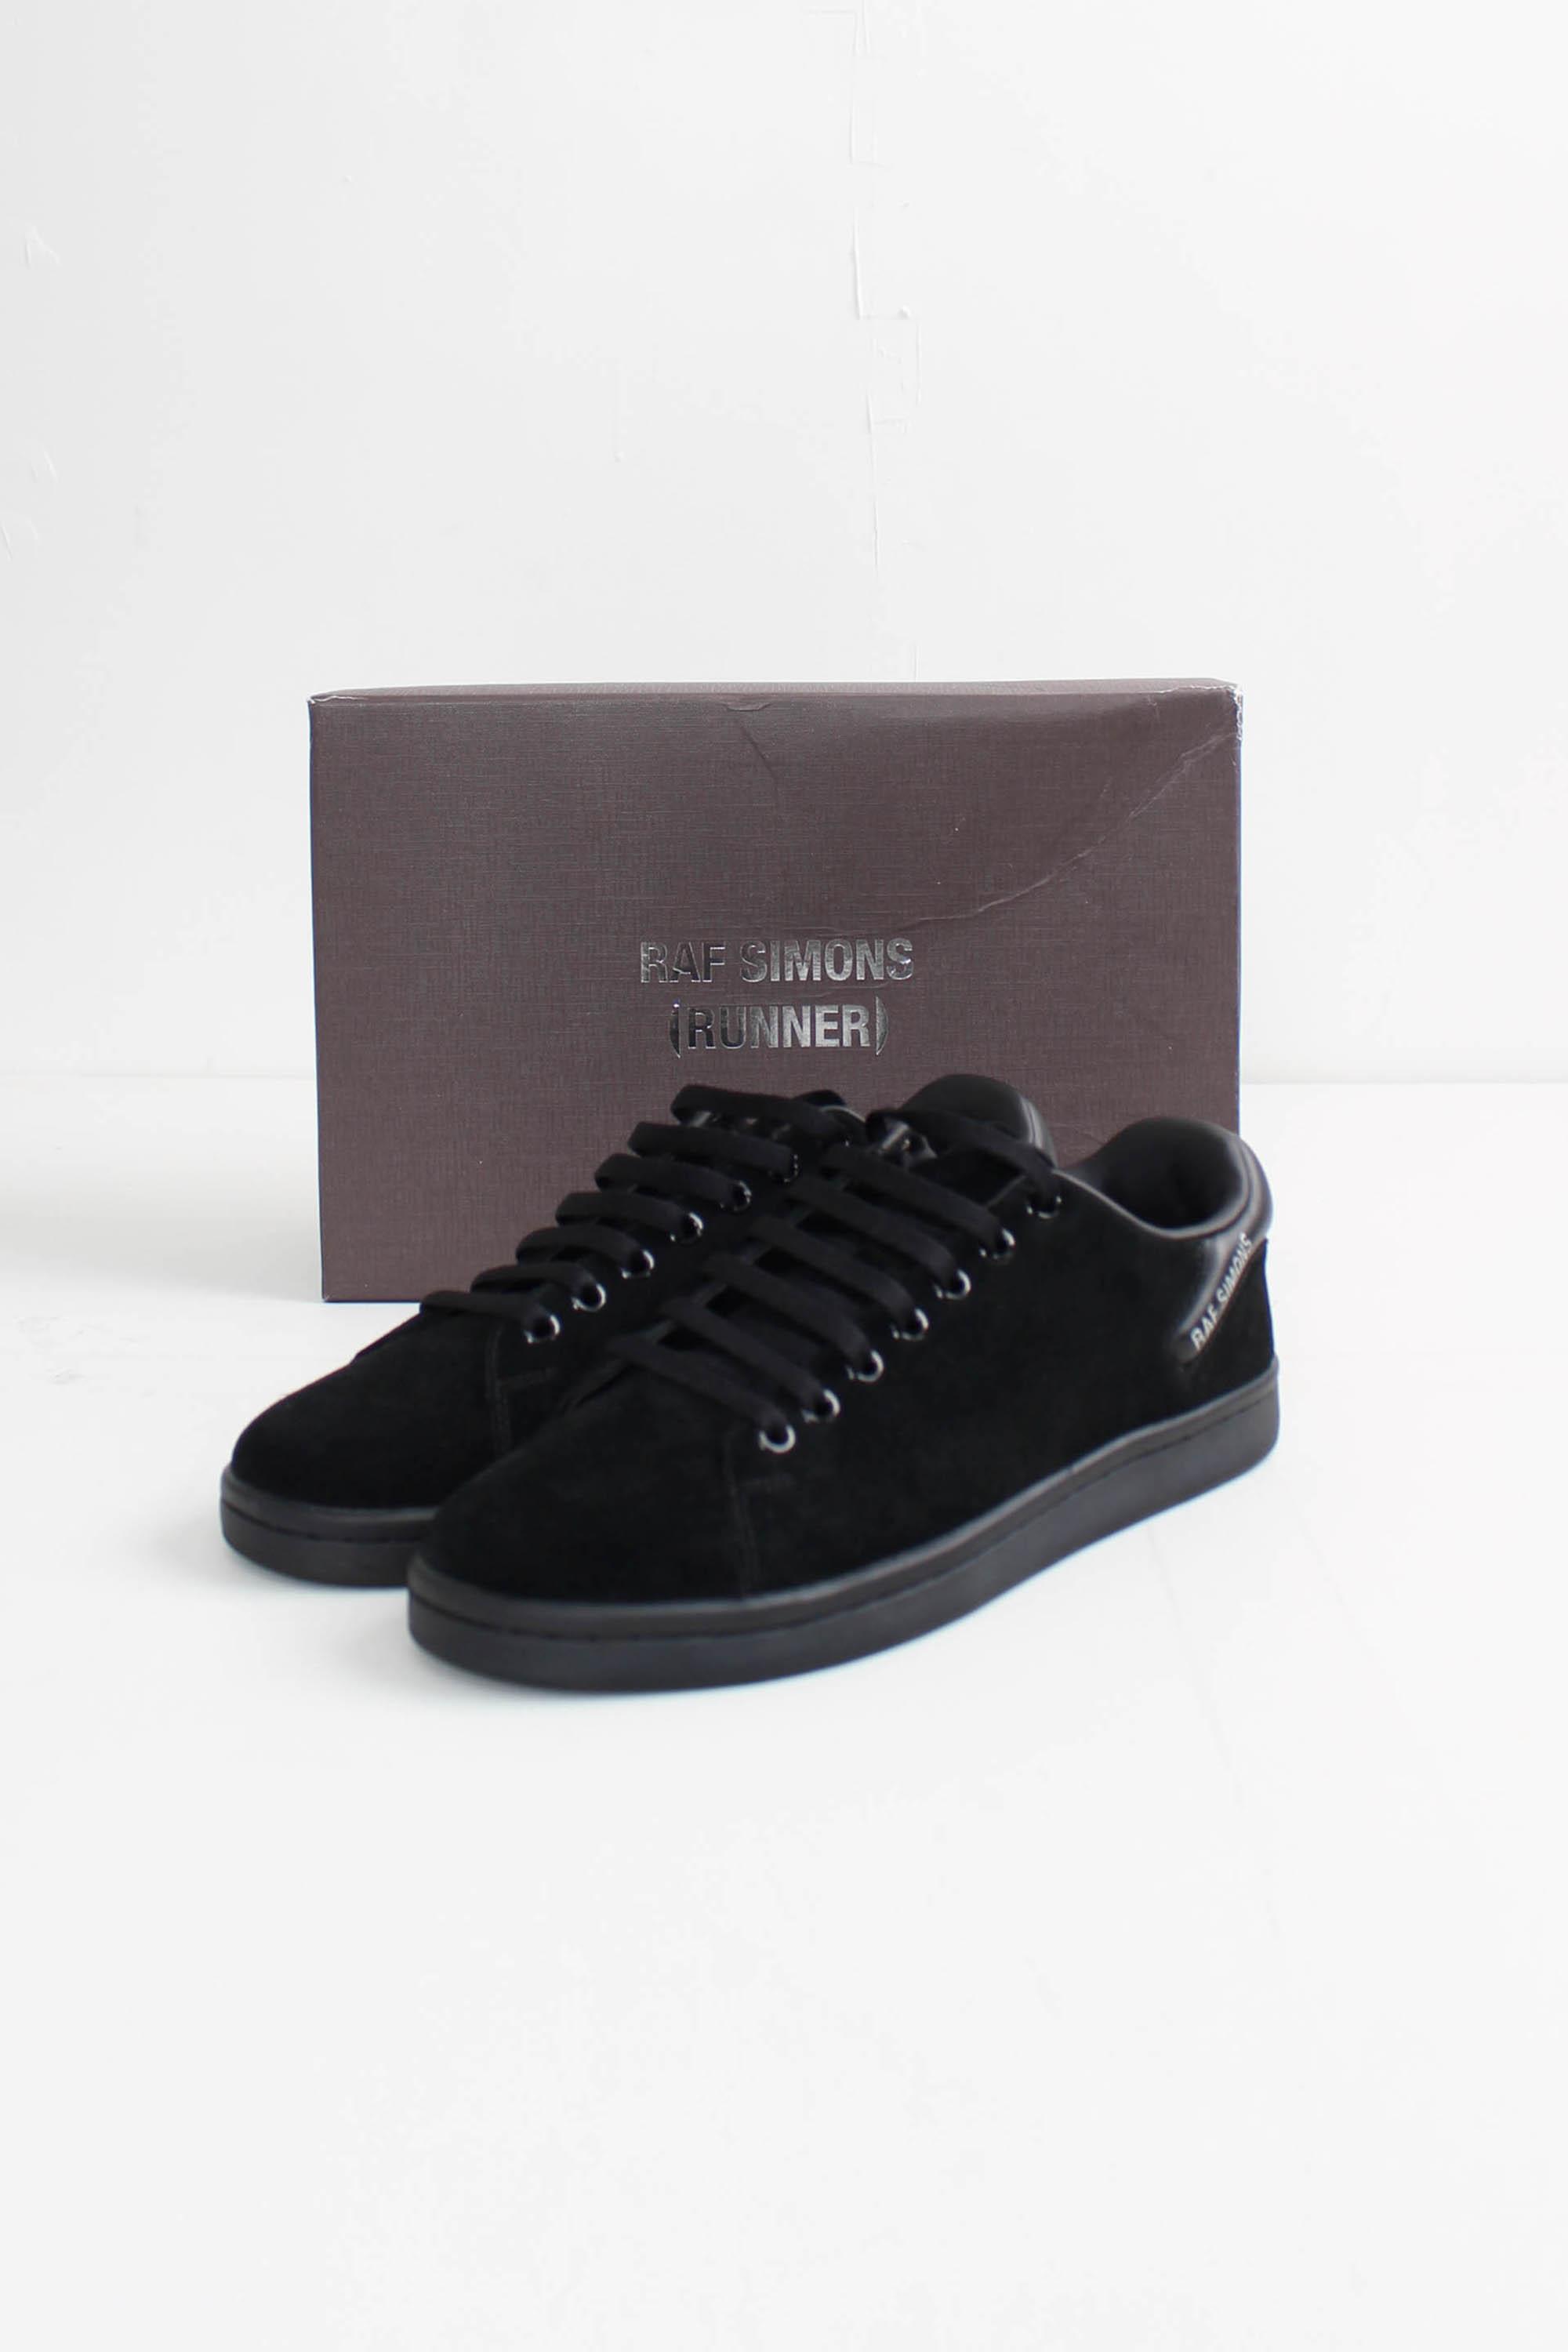 RAF SIMONS Orion Suede Cupsole Sneaker